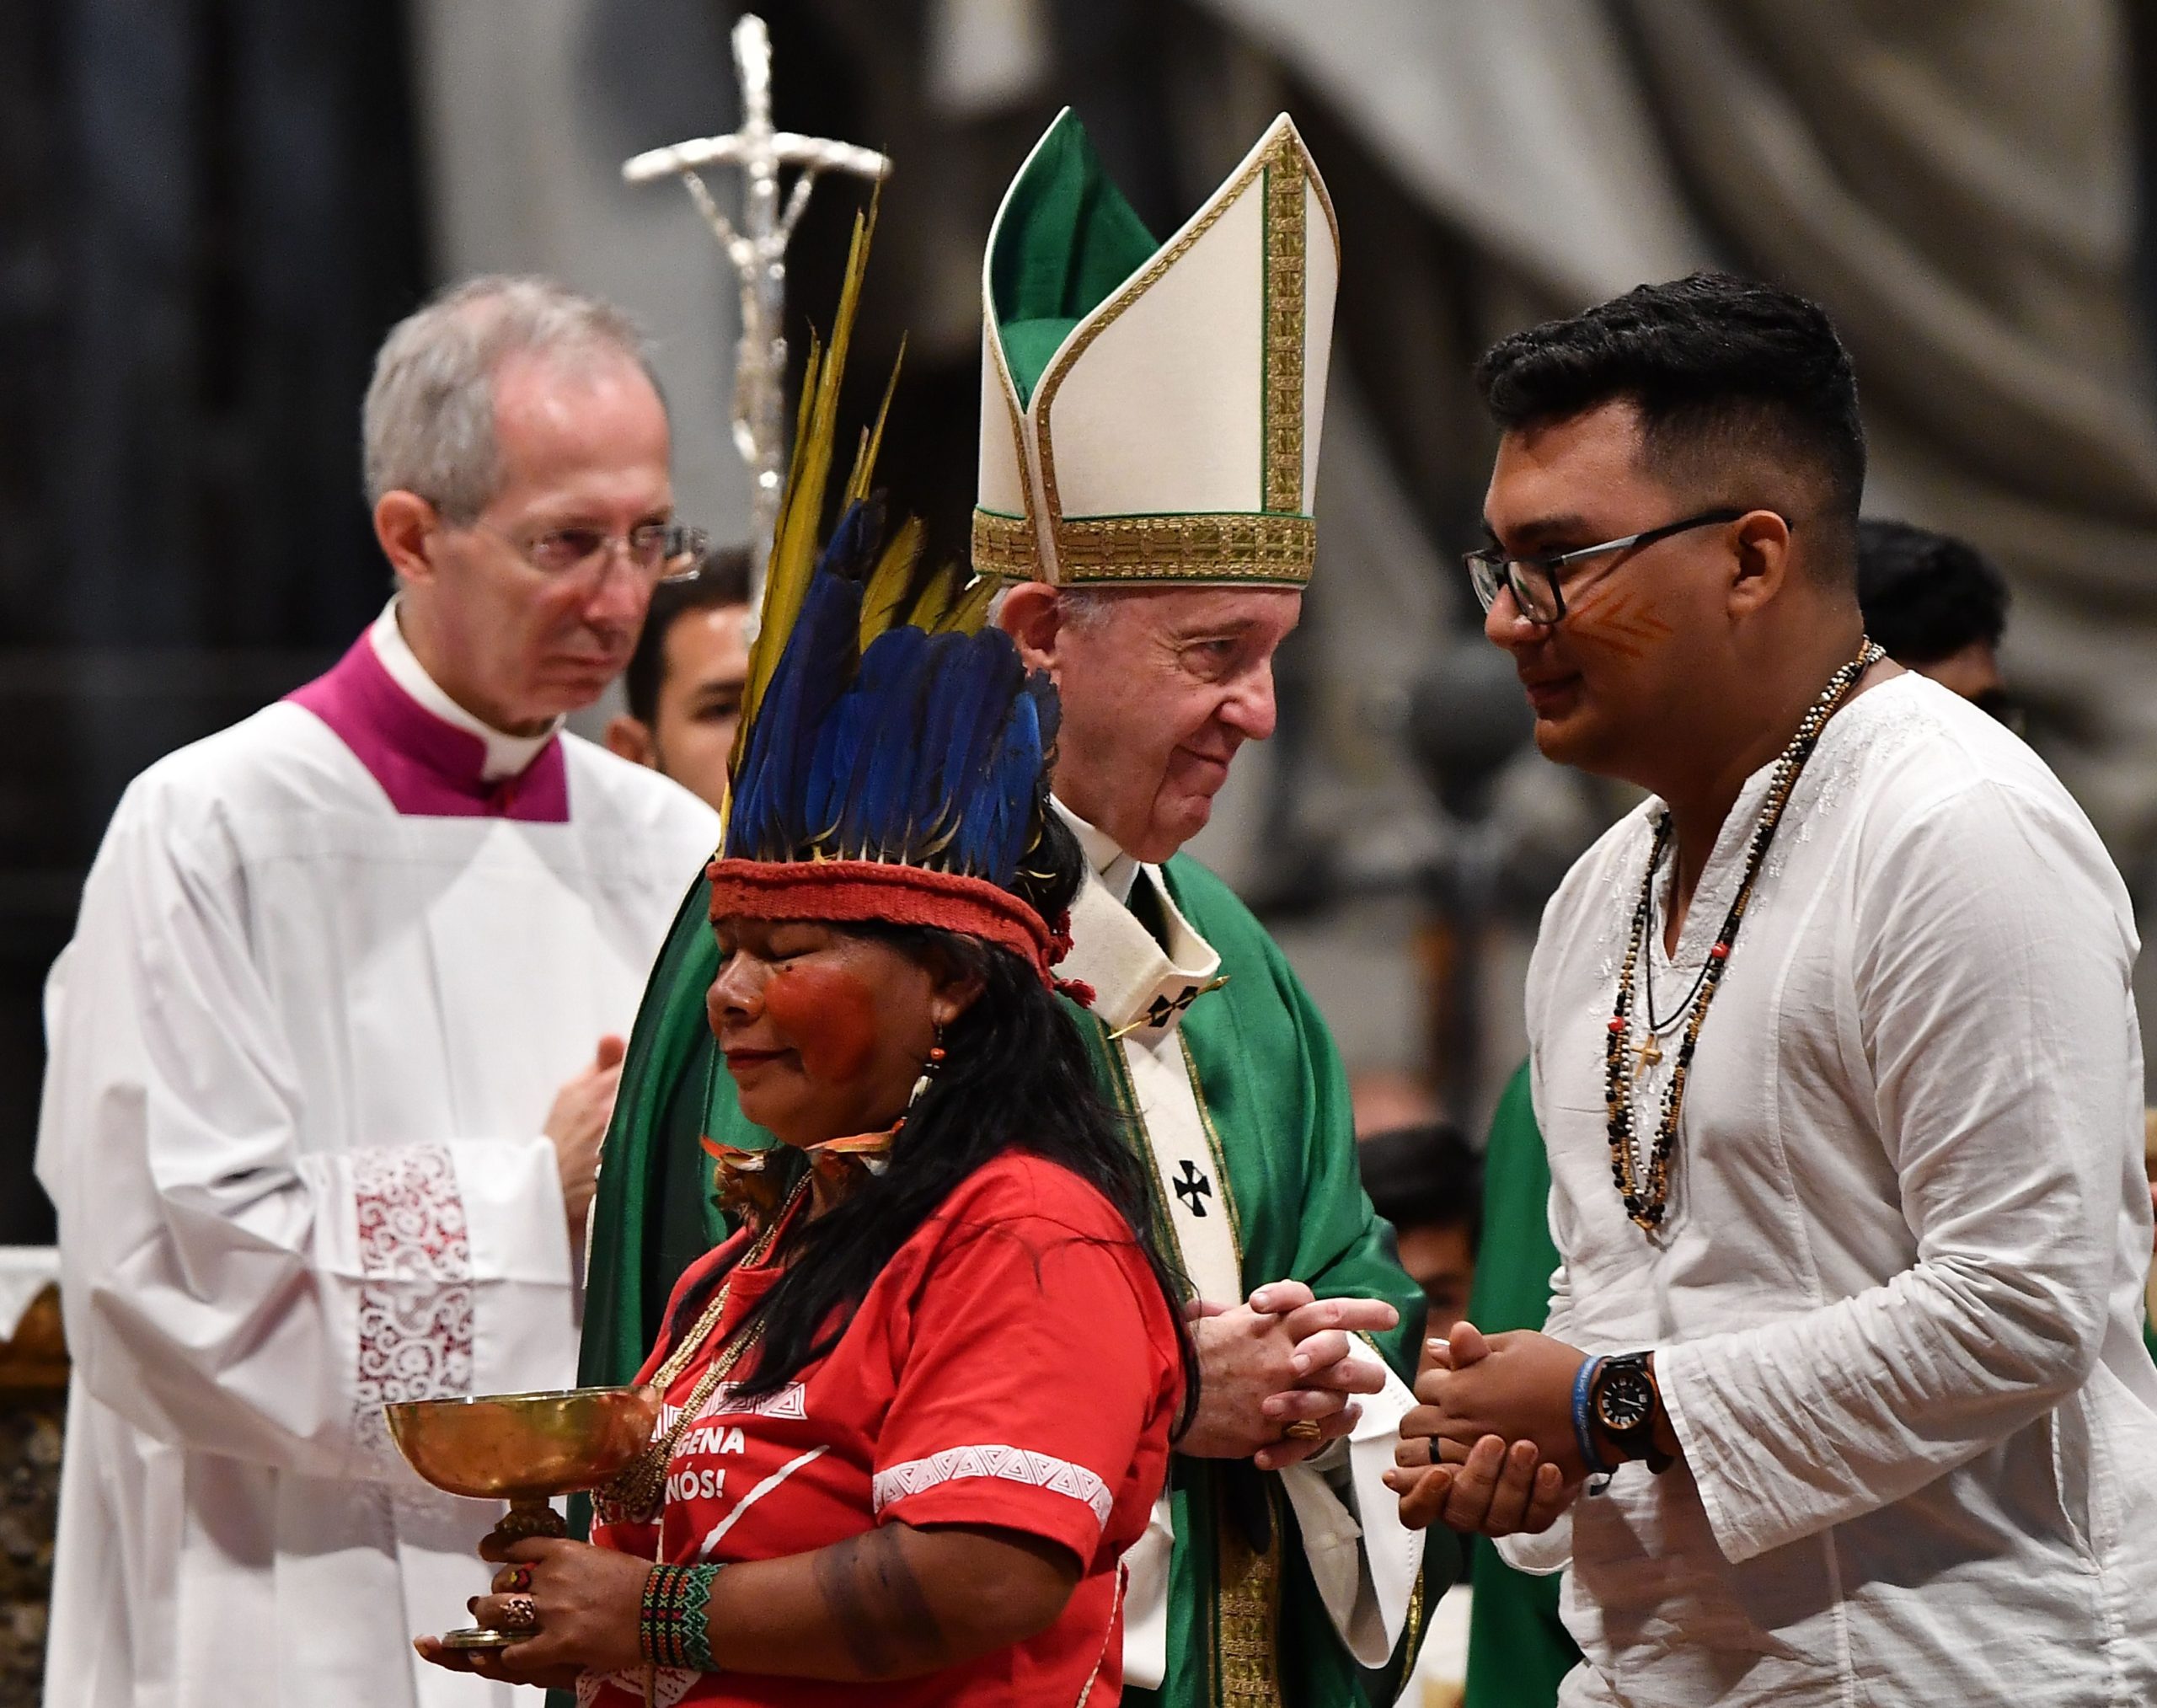 Pope Francis opens the Synod on the Amazon: "Fire set off by interests that destroy"